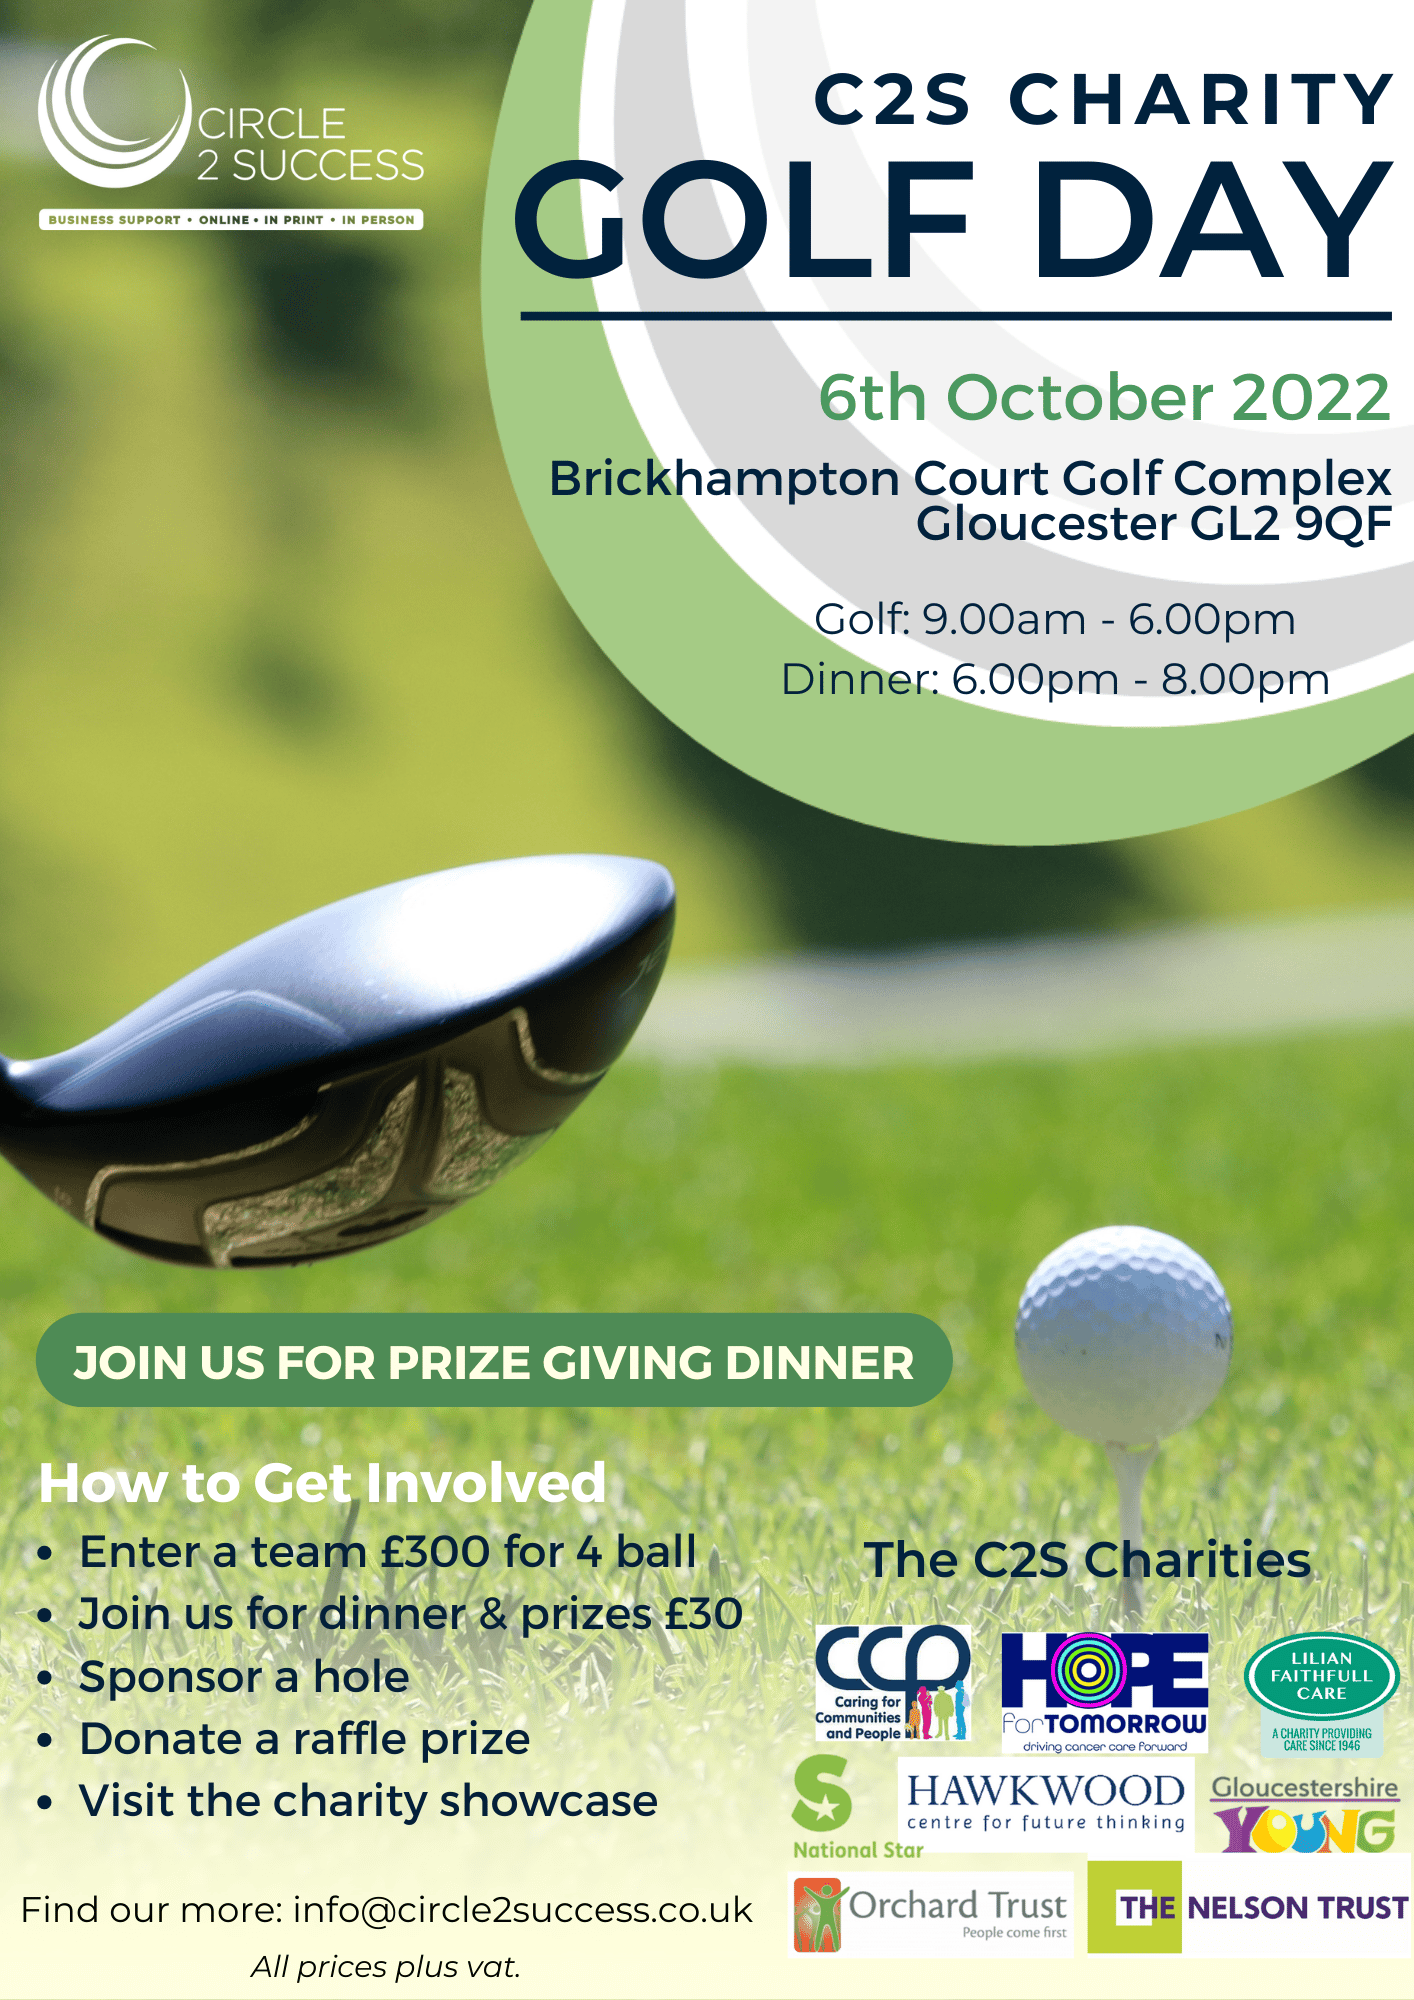 C2S Annual Charity Golf Day 6th October 2022